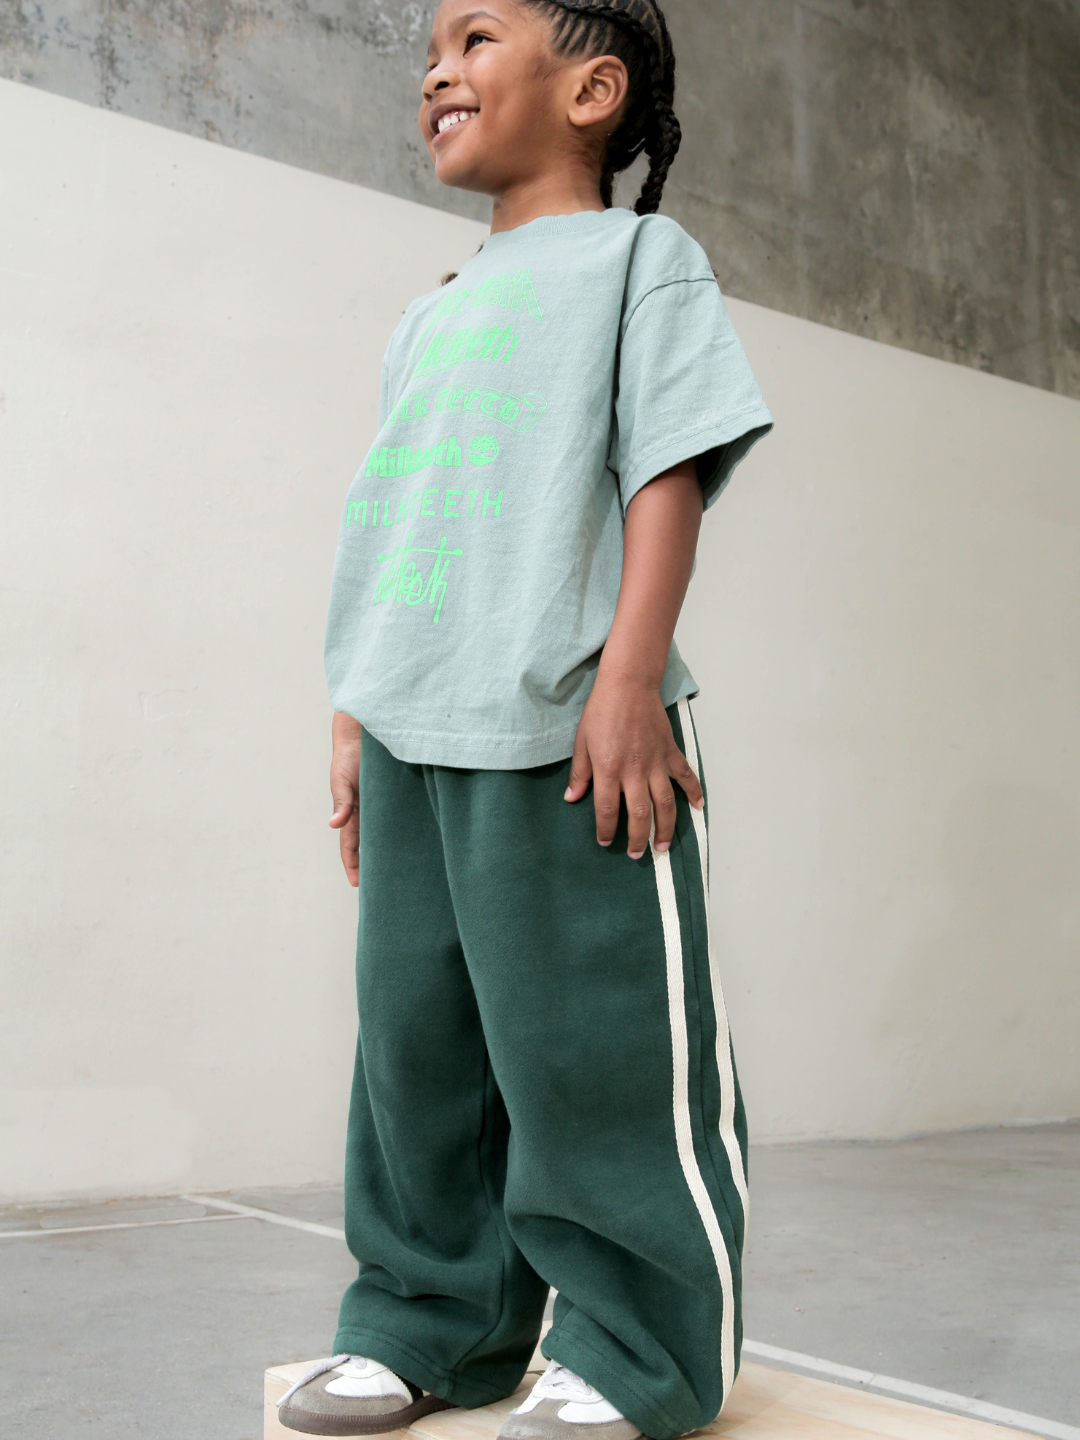 Child wearig the varsity track pants in hunter green with white stripes down the side. He wears his hair in braids, a light green t-shirt with neon green Milk Teeth lettering, and white and grey sneakers. He is smiling and standing on a wooden box on a grey concrete playground.